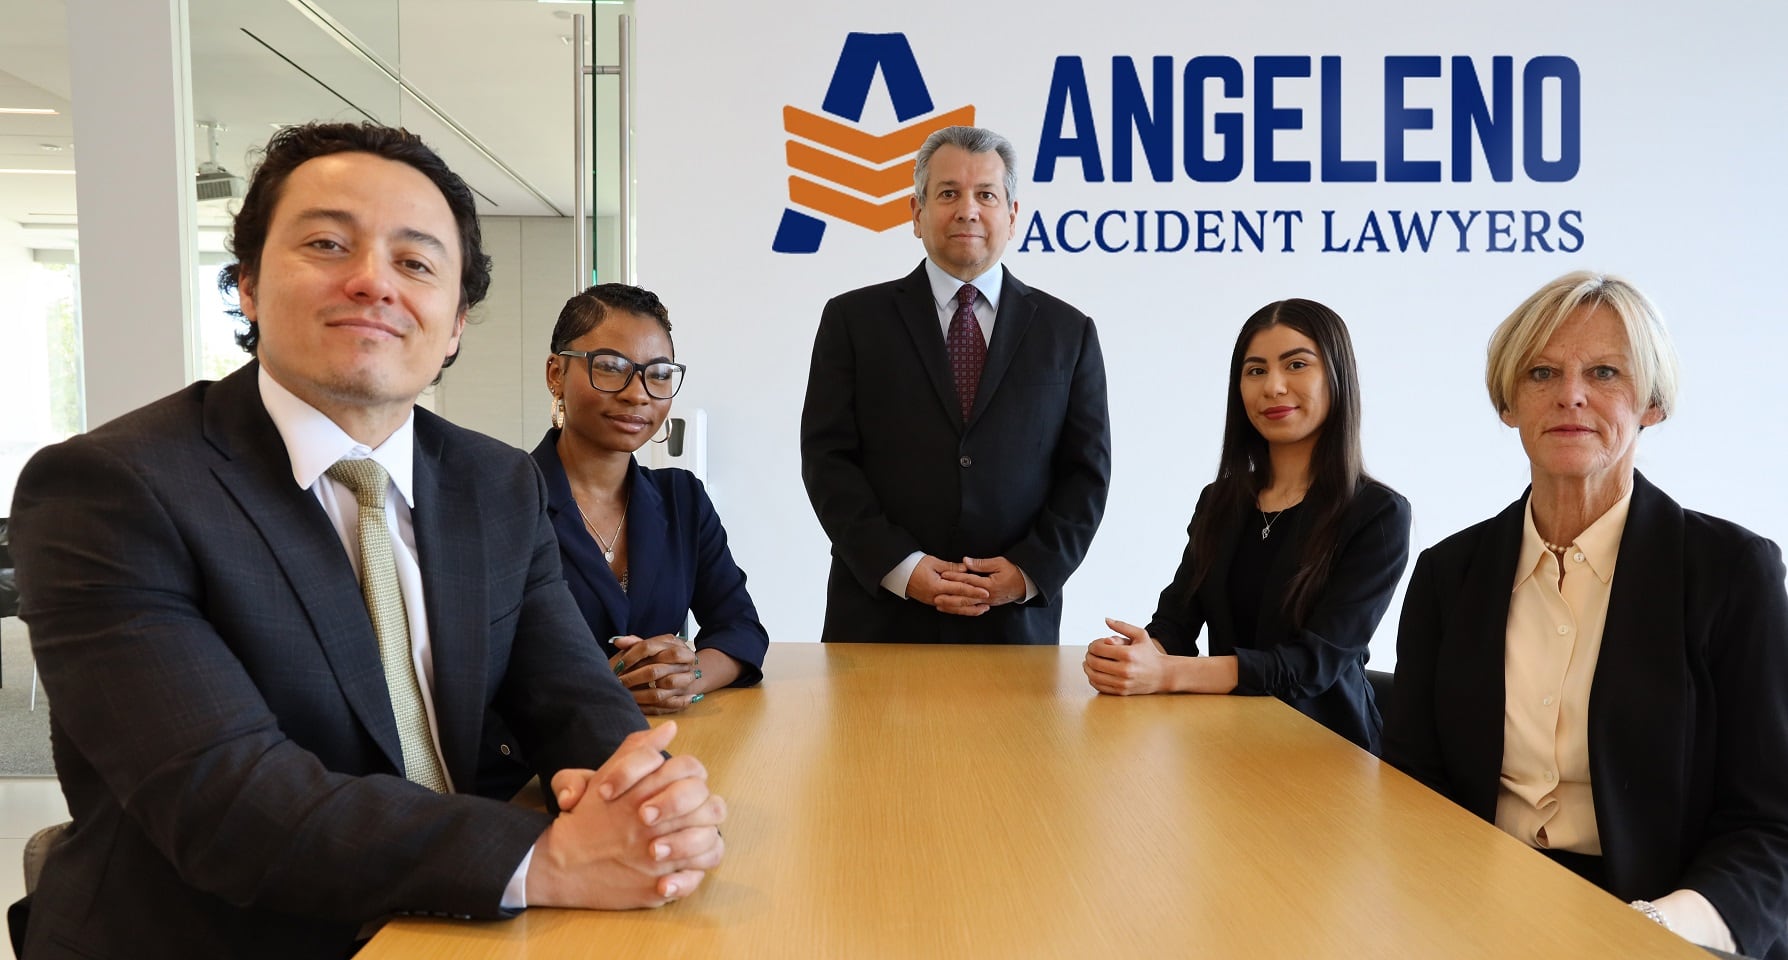 Angeleno Accident Lawyers — Los Angeles, CA Law Firm, US, compensation lawyer